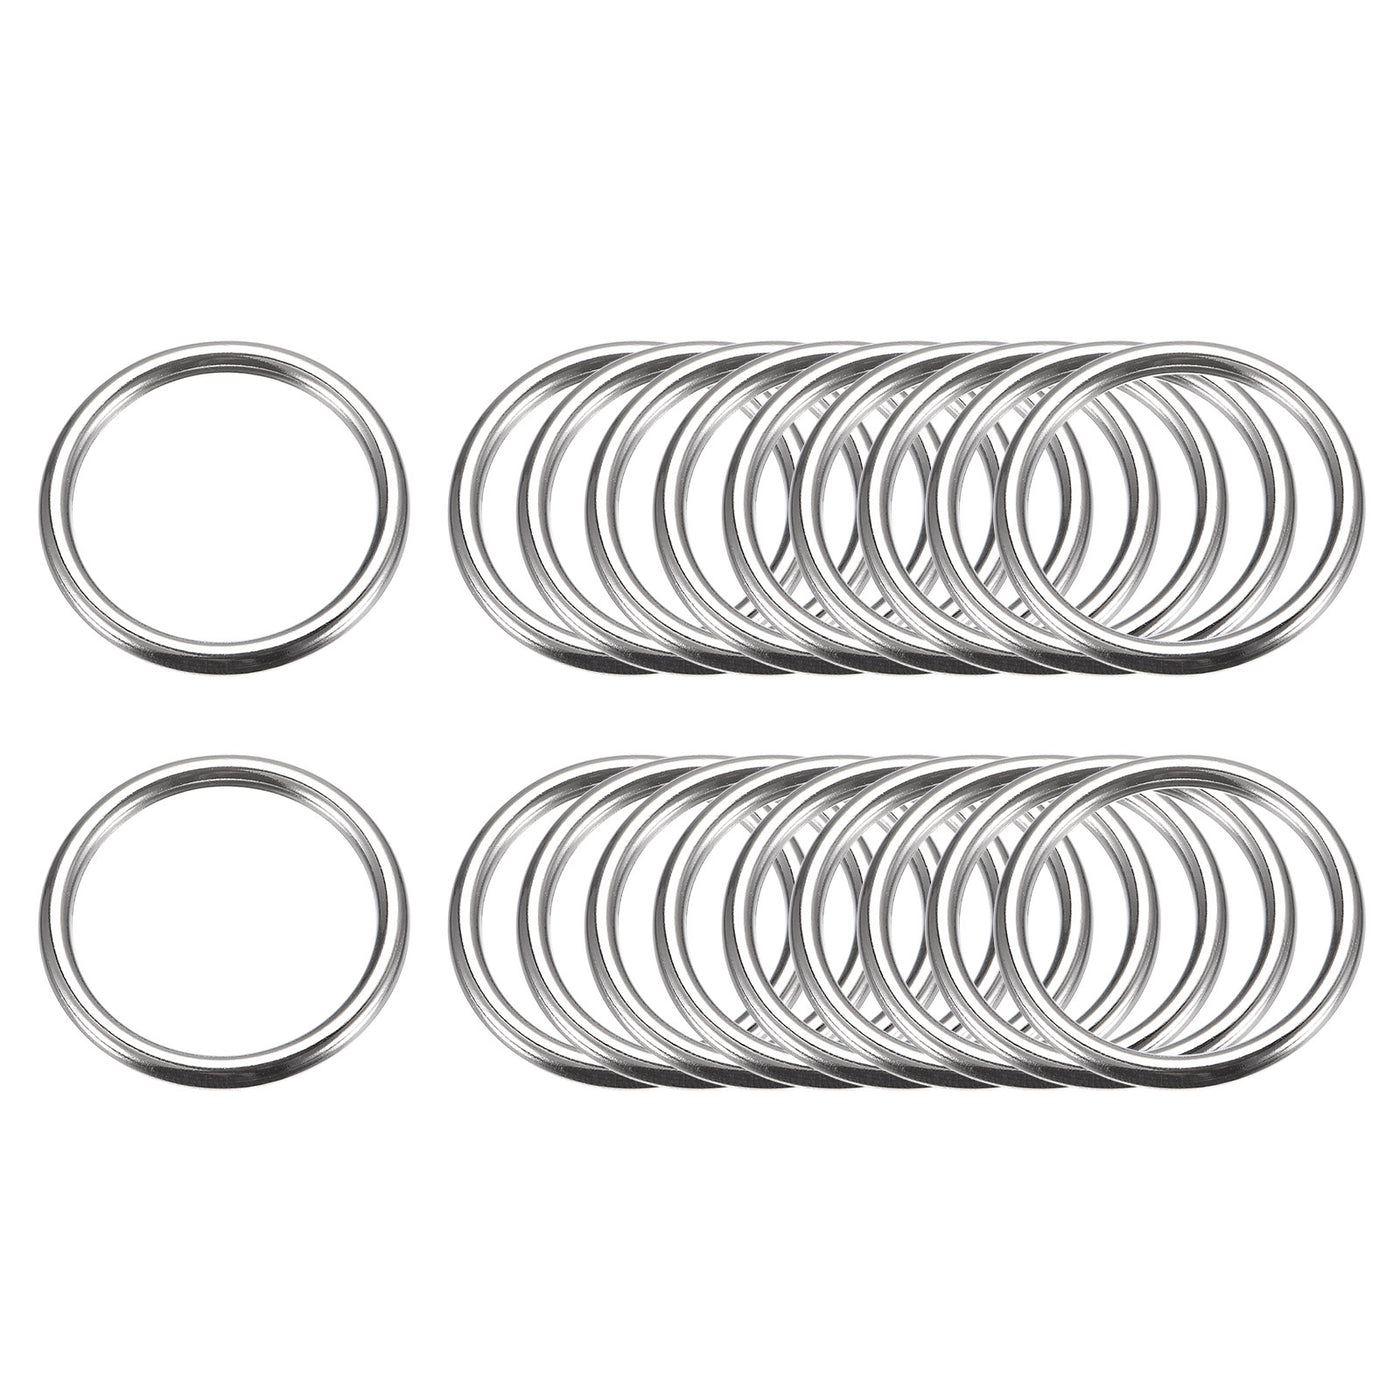 uxcell Uxcell Metal O Rings Welded O-Ring Buckle for Craft Belt Purse Bag Making Hardware